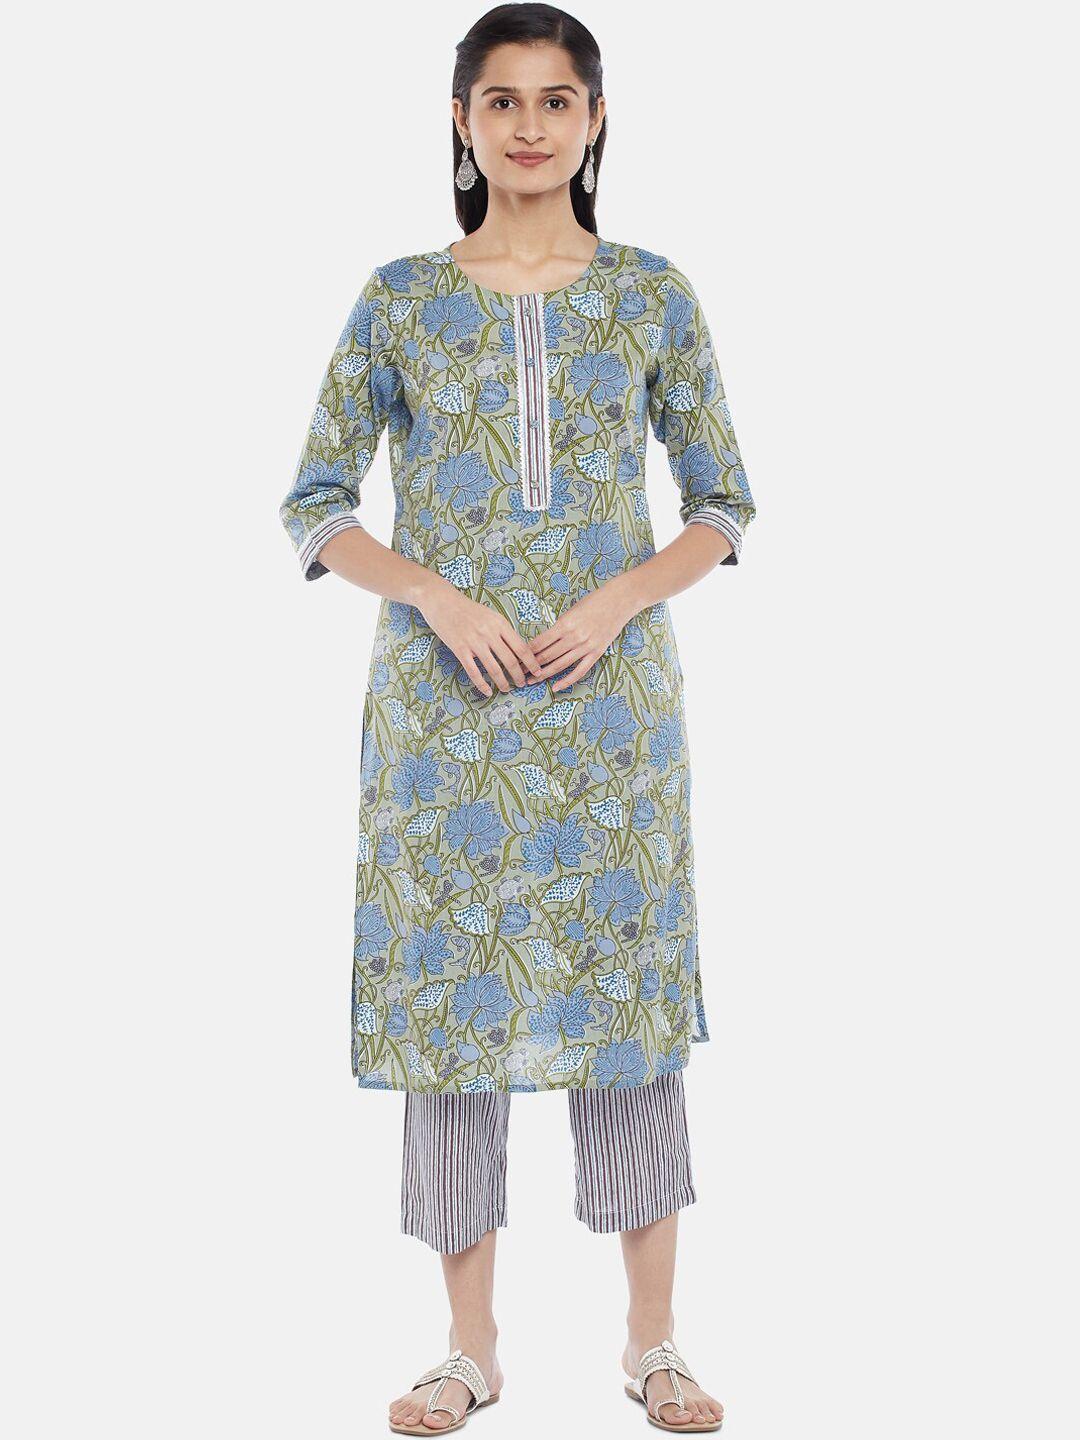 rangmanch by pantaloons women green floral printed pure cotton kurta with trousers & with dupatta